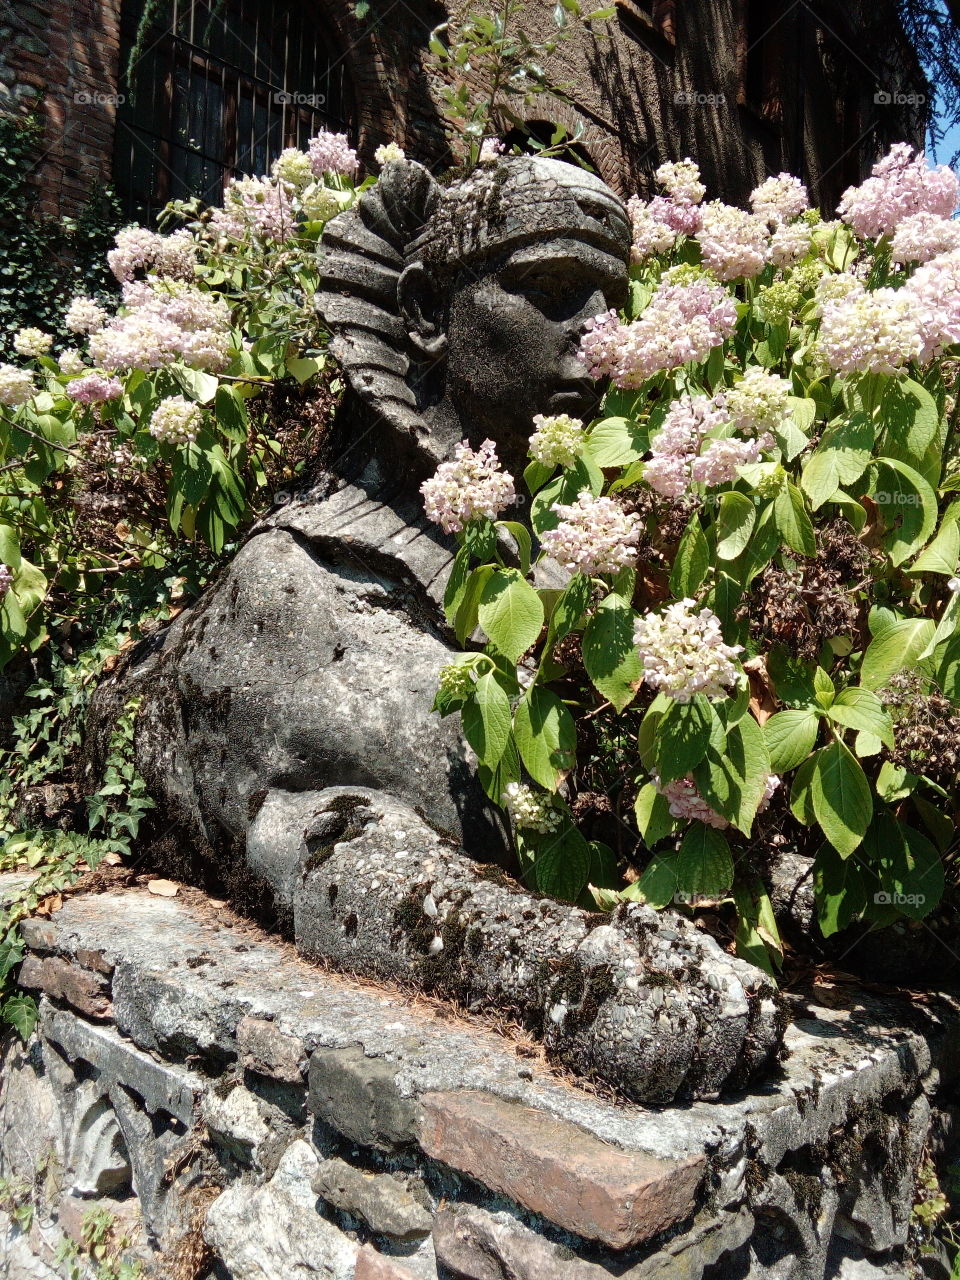 Reproduction of a sphinx statue in Italy, private park with flowers